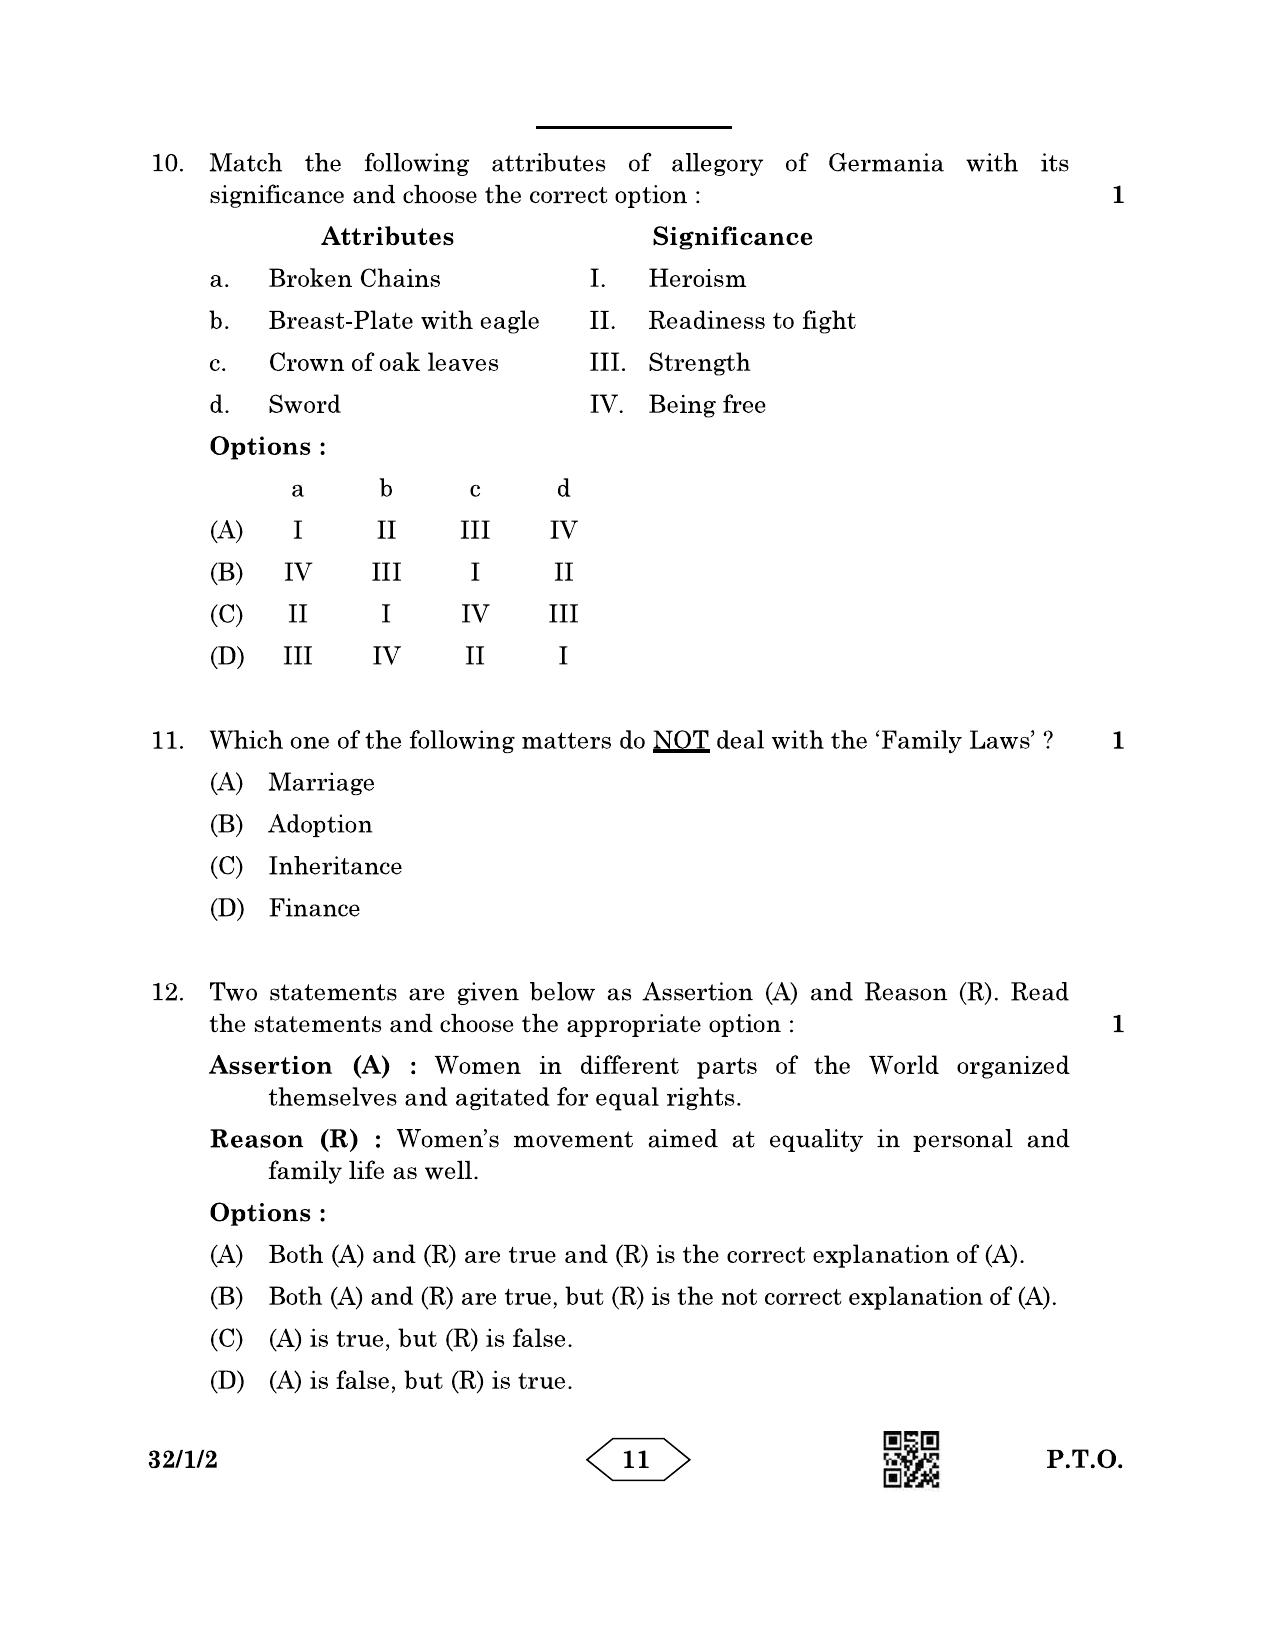 CBSE Class 10 32-1-2 Social Science 2023 Question Paper - Page 11